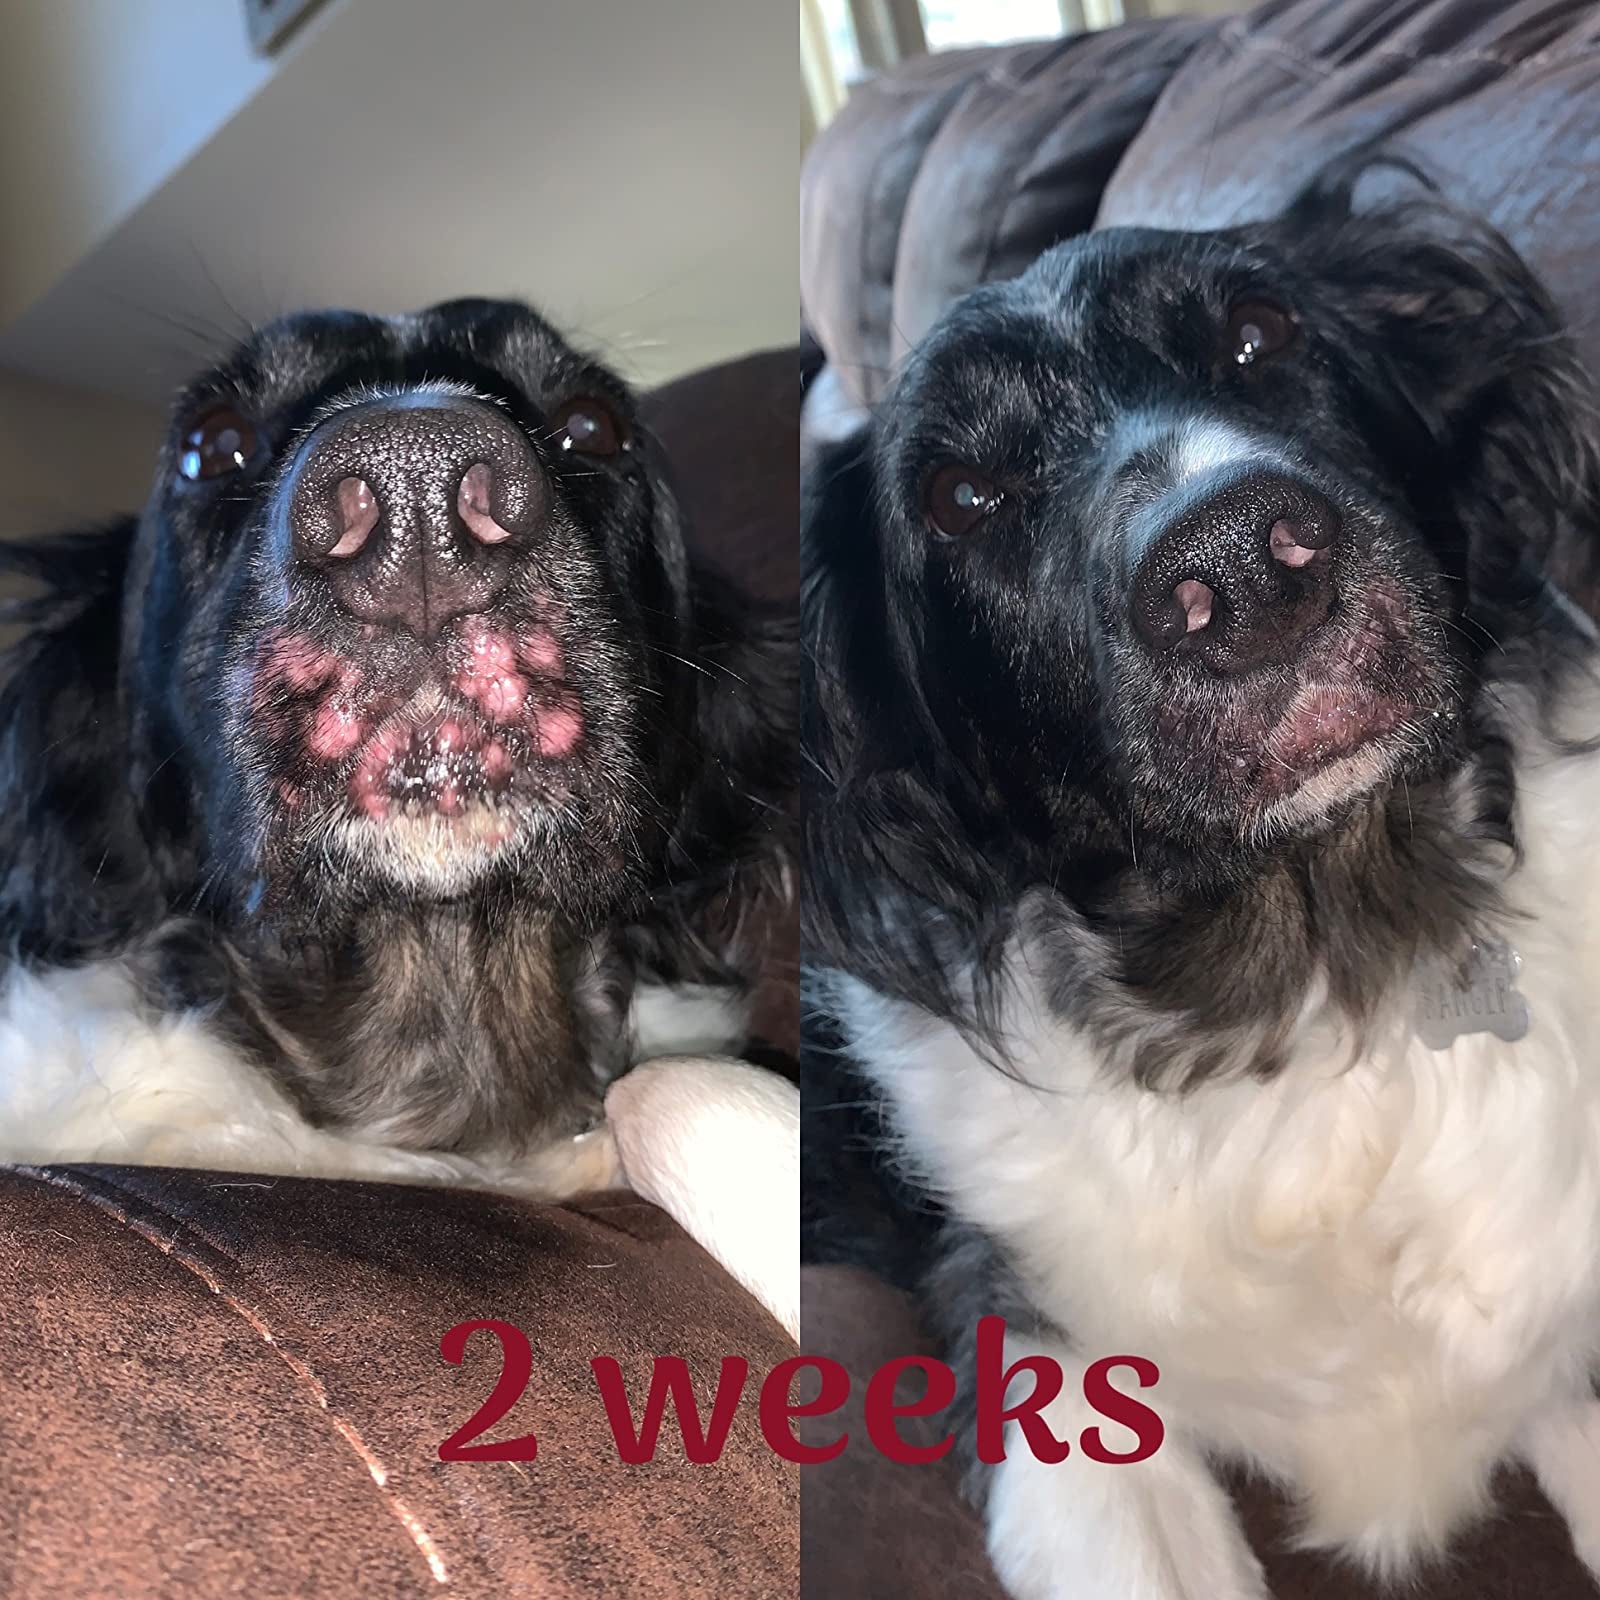 reviewer before and after images of a dog's snout covered in an outbreak that goes away